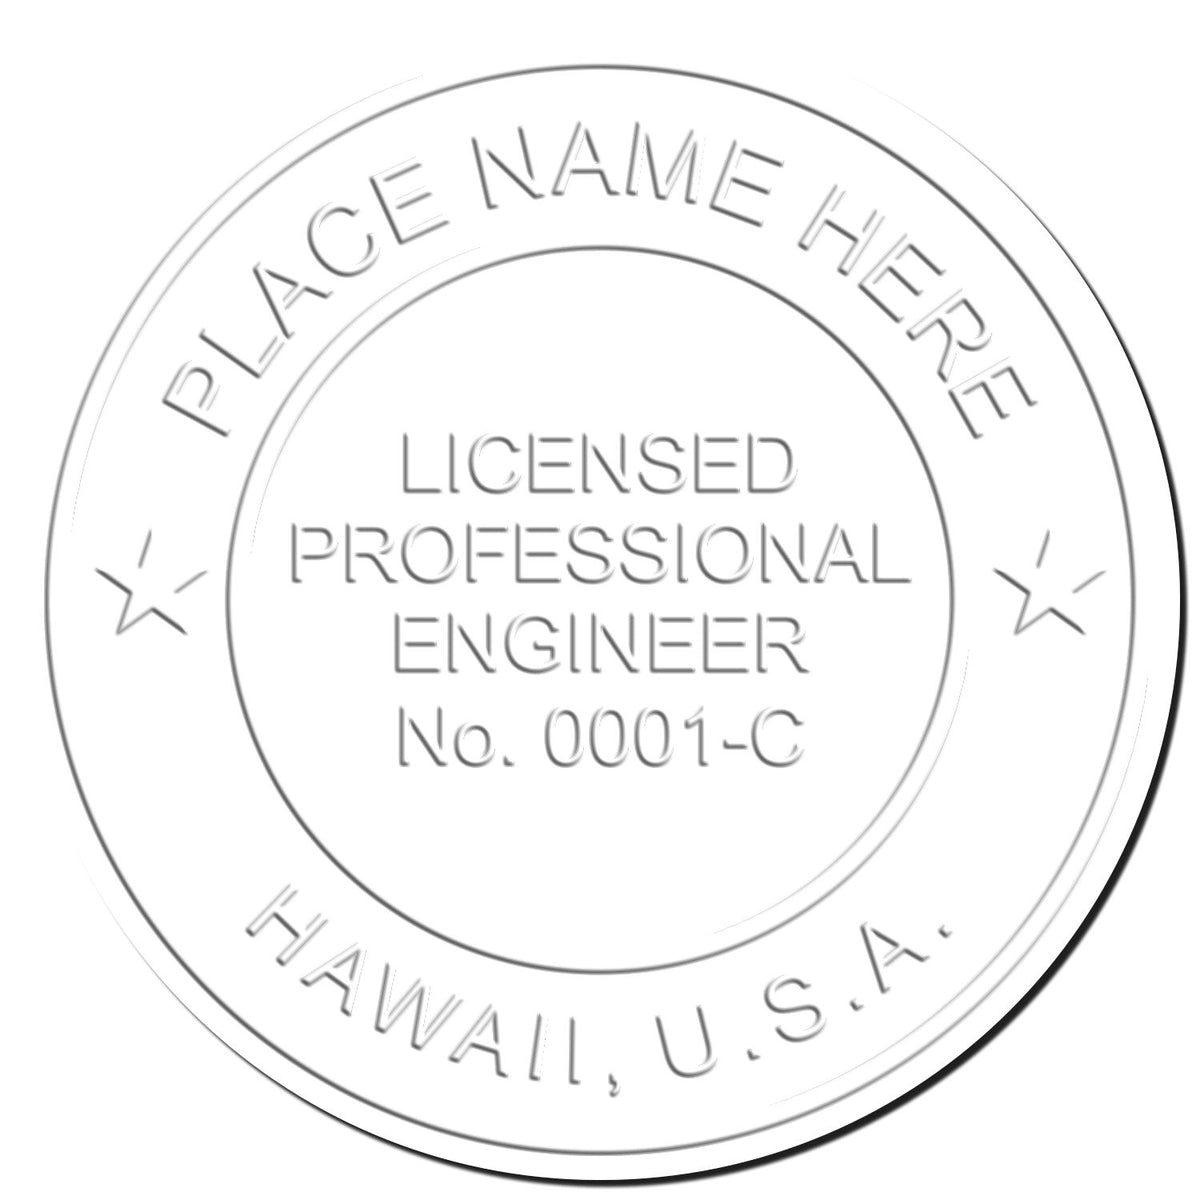 This paper is stamped with a sample imprint of the State of Hawaii Extended Long Reach Engineer Seal, signifying its quality and reliability.